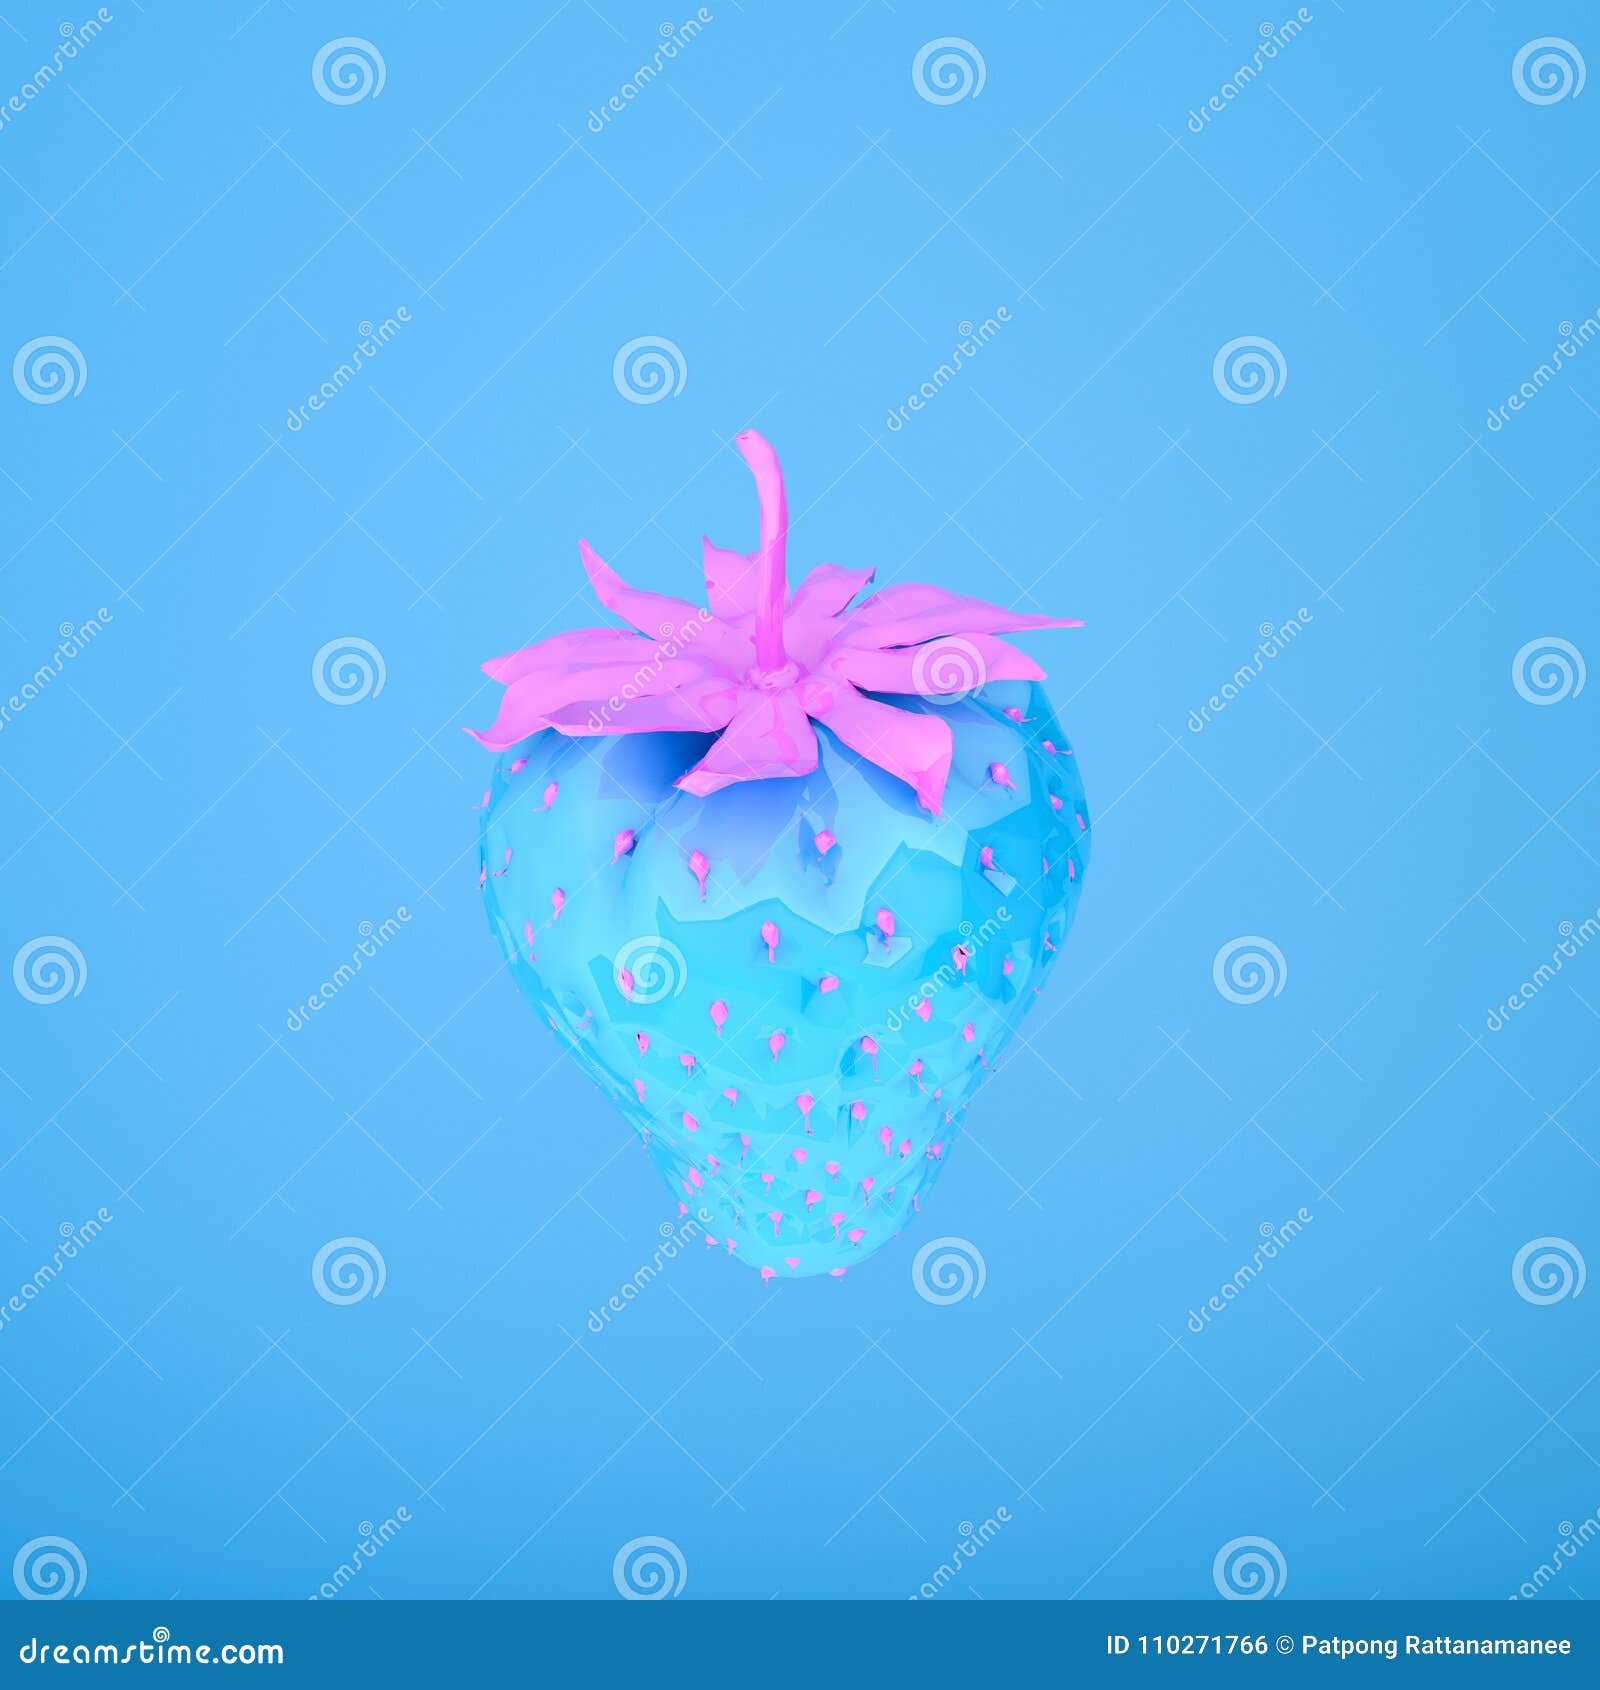 Blue Strawberry on a Blue Background,valentines Day, 3d Rendering. 3d  Illustration Stock Illustration - Illustration of fruit, abstract: 110271766